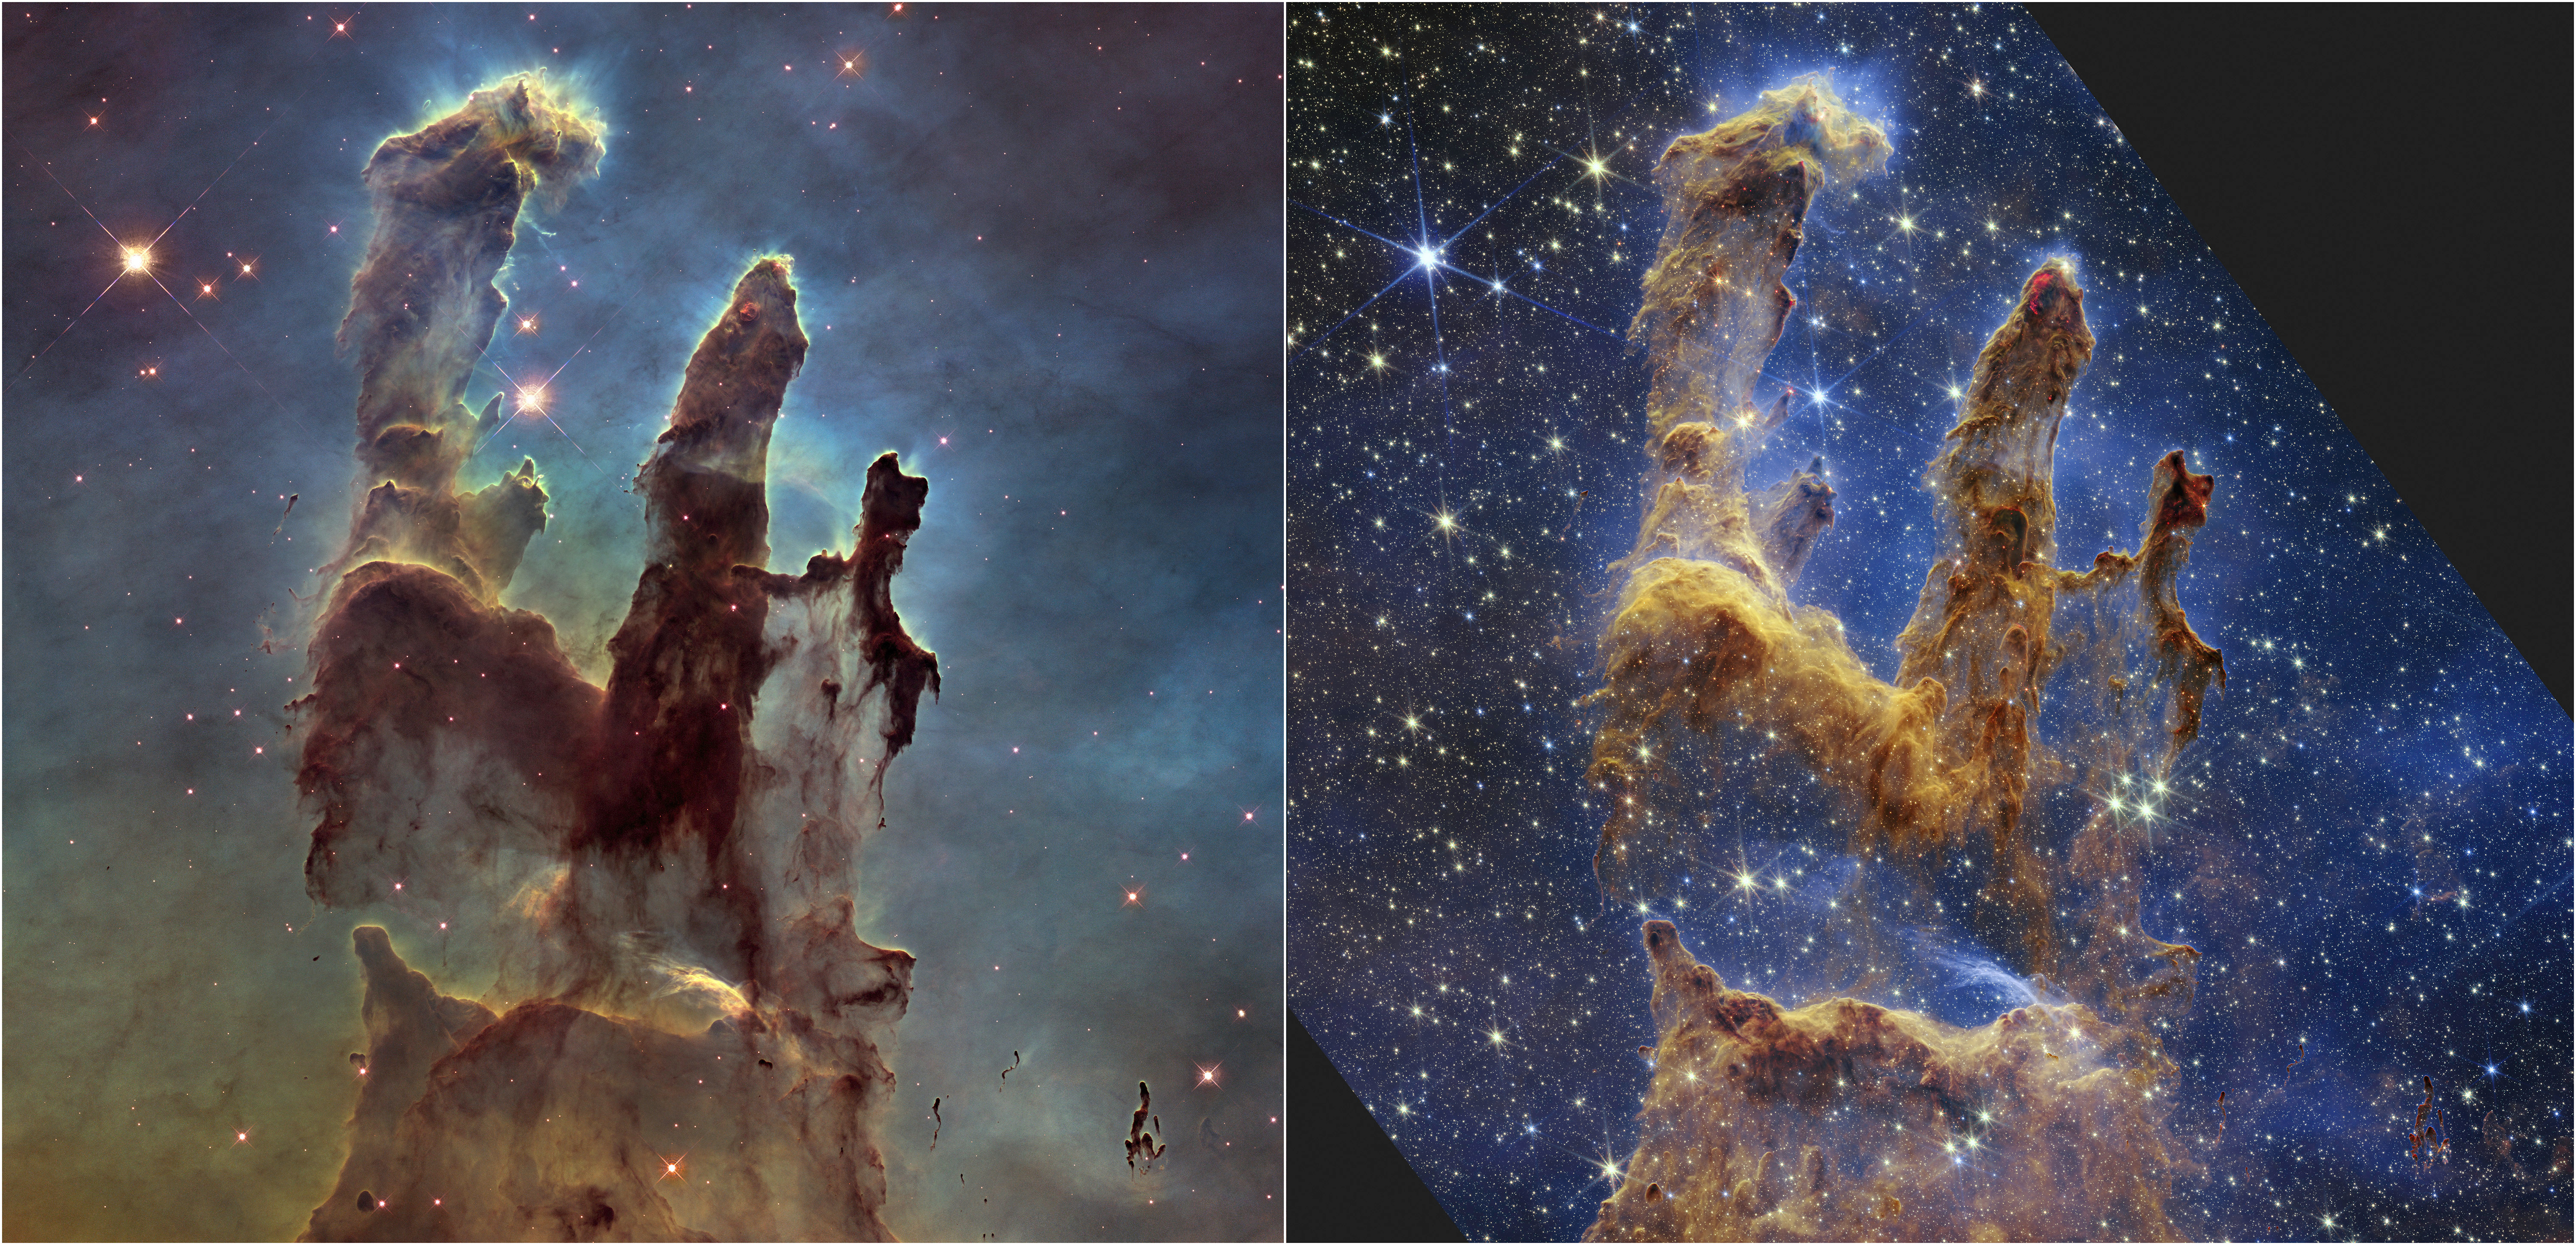 This combination image provided by NASA on Wednesday, Oct. 19, 2022, shows the Pillars of Creation as imaged by NASA's Hubble Space Telescope in 2014, left, and by NASA's James Webb Telescope, right. The new, near-infrared-light view from the James Webb Space Telescope helps us peer through more of the dust in the star-forming region, according to NASA. (NASA, ESA, CSA, STScI via AP)